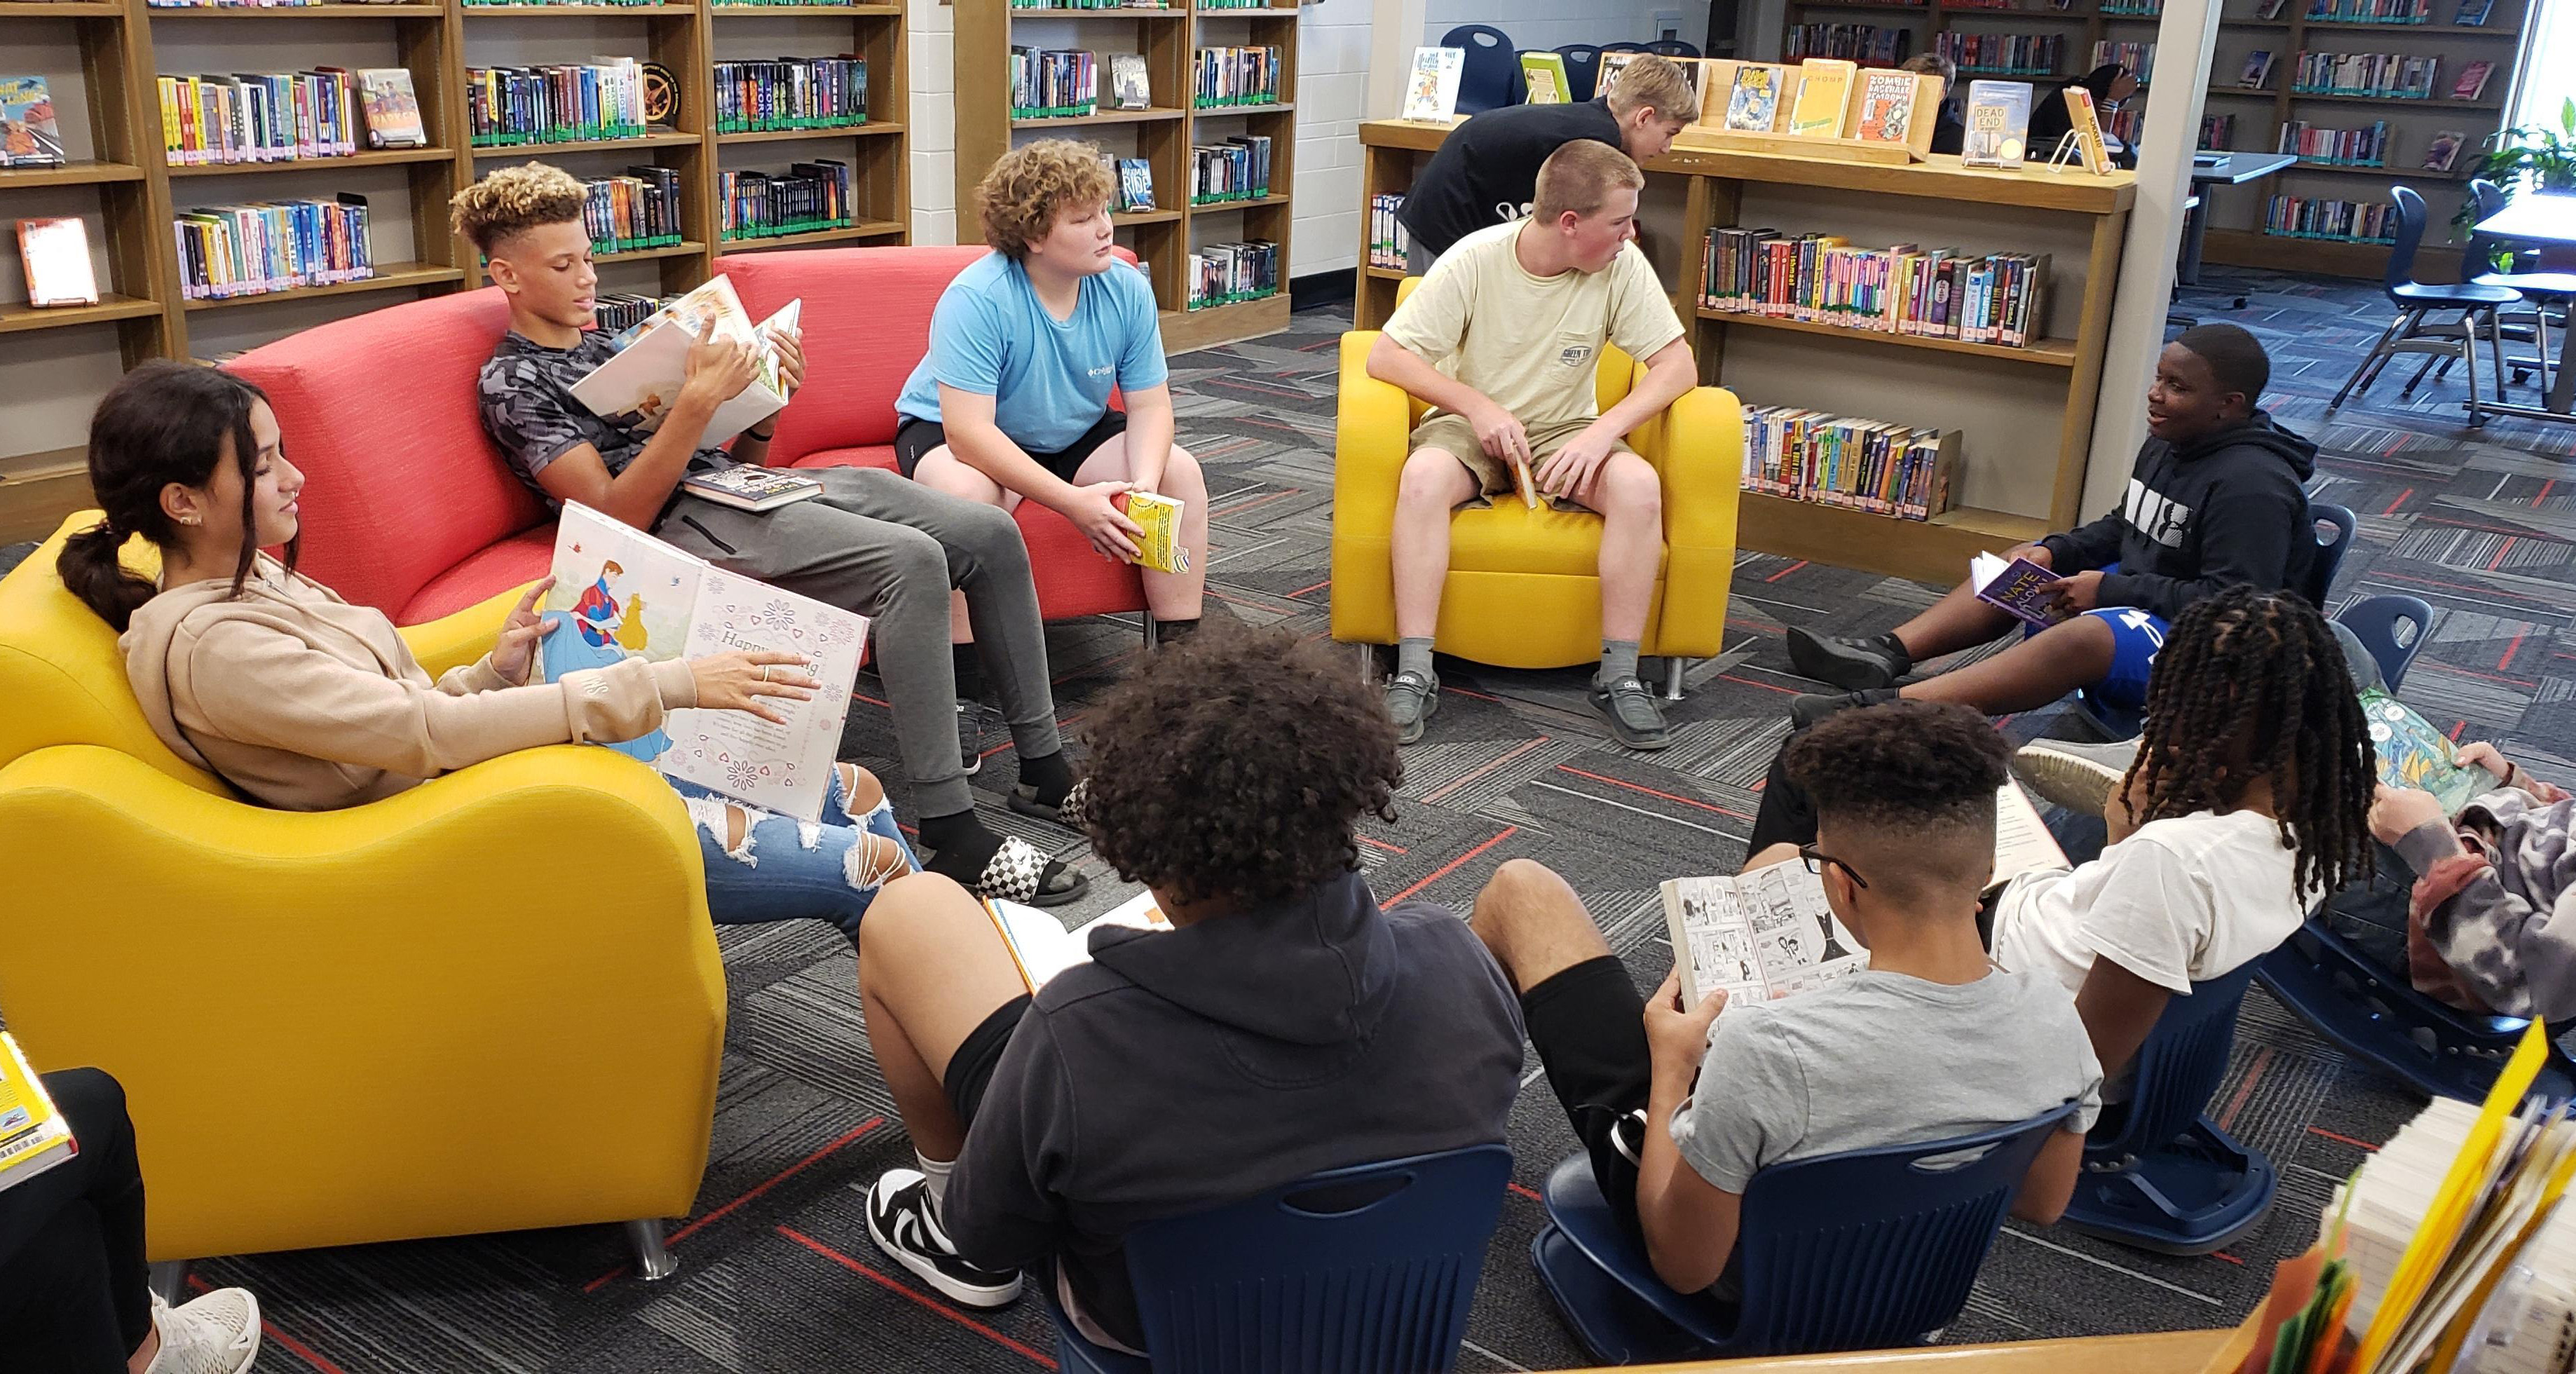 A group of students reading in the school library